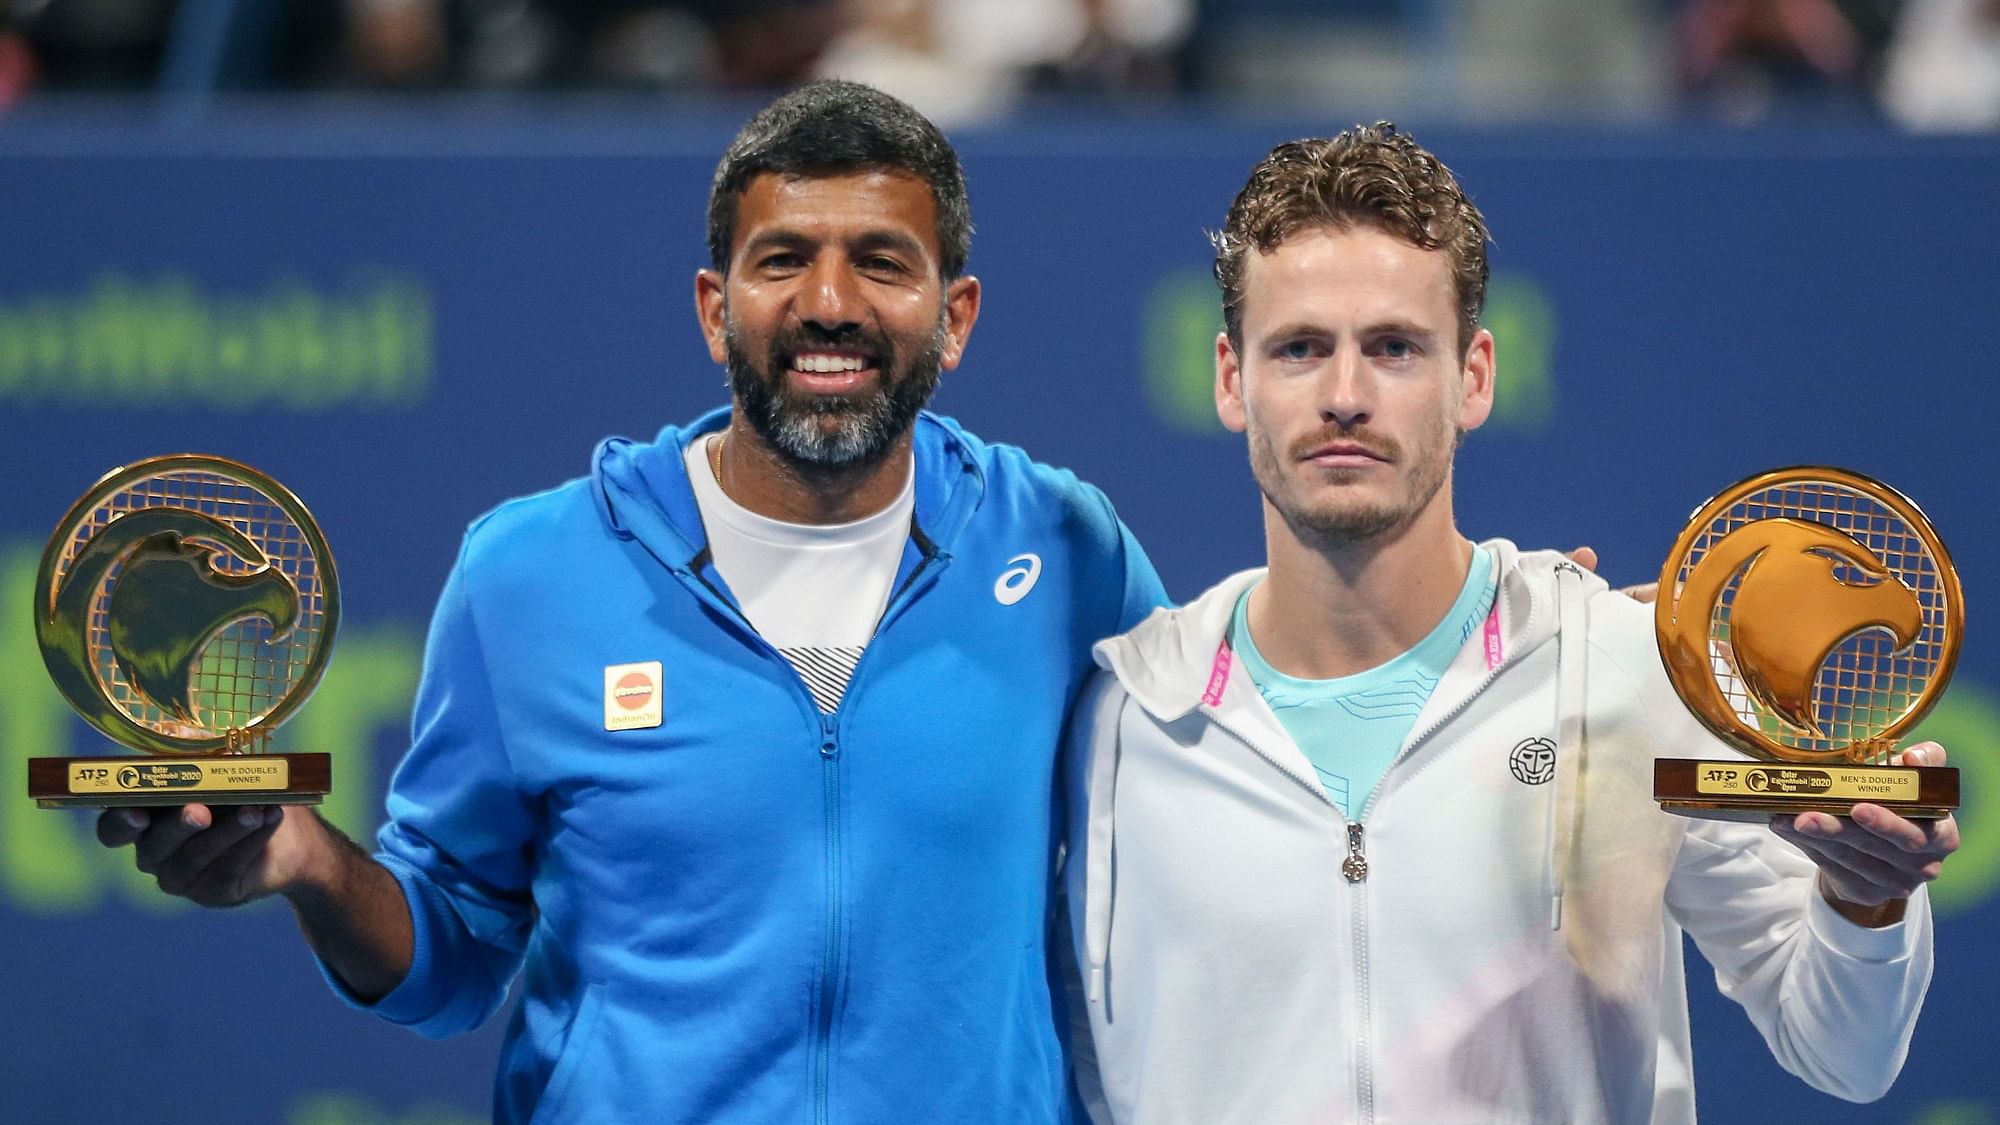 This is the first tournament Rohan Bopanna (left) and Wesley Koolhof came together as a pair.